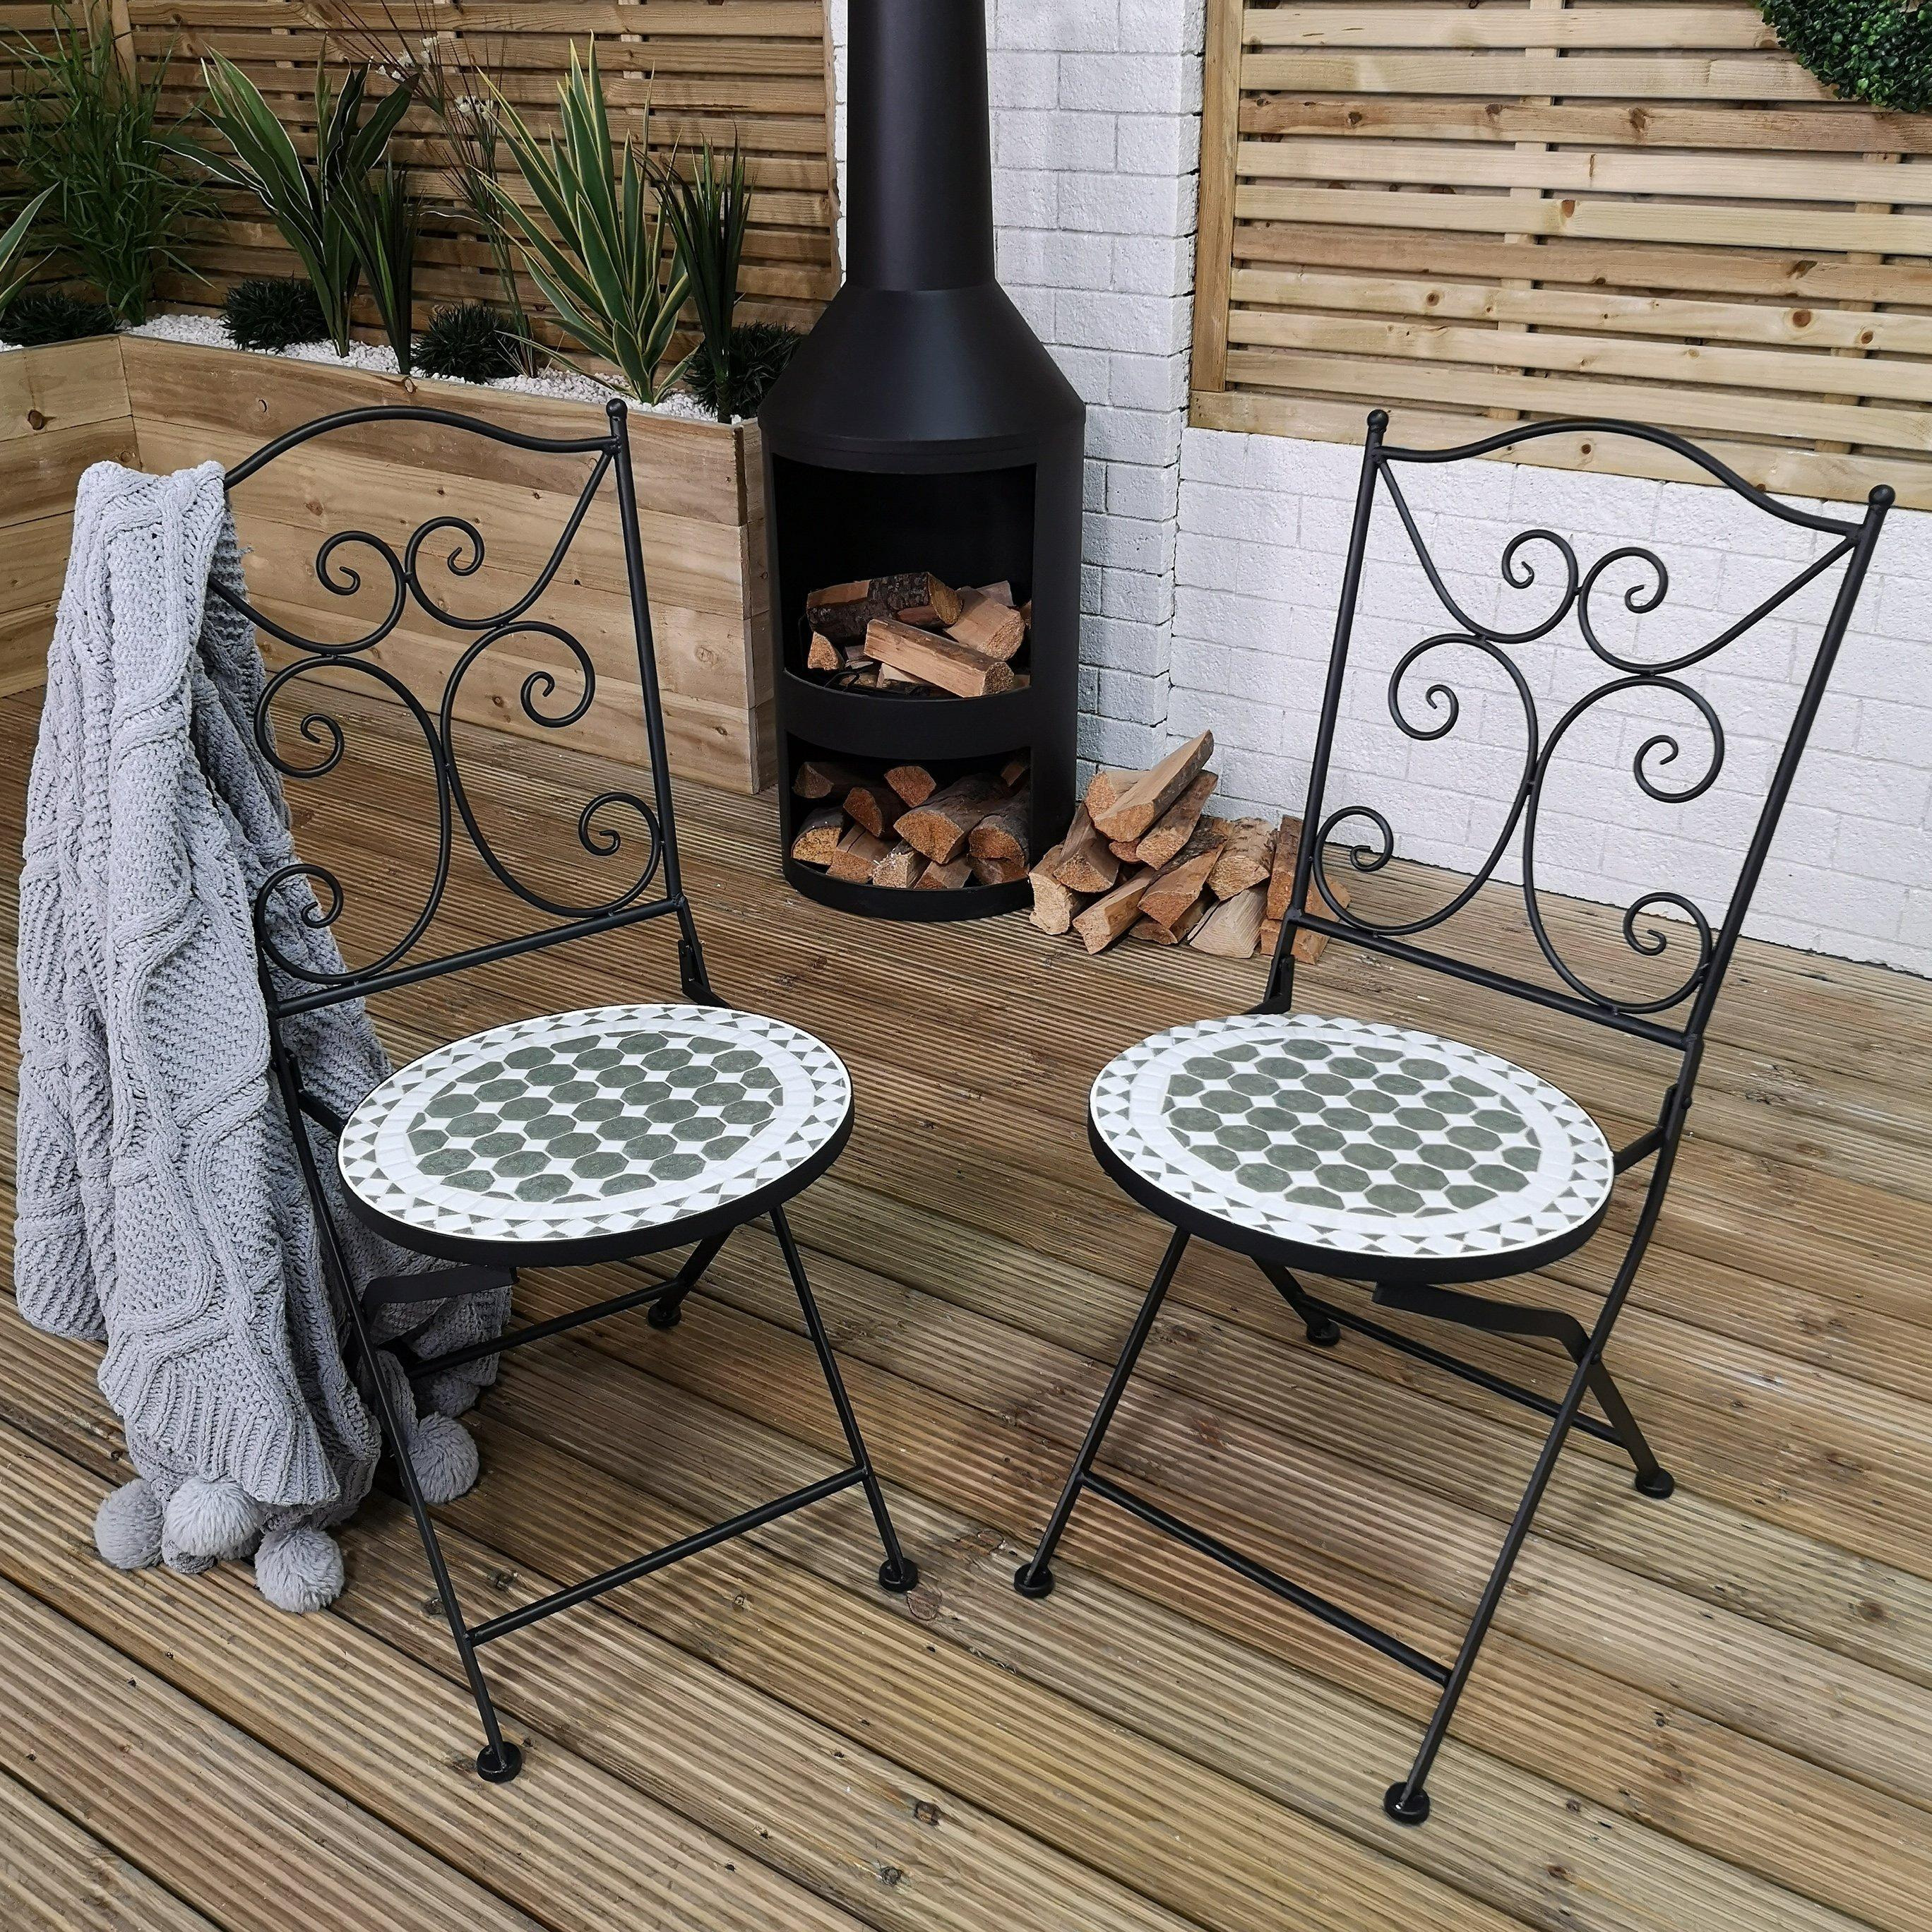 Set of 2 Outdoor Black Mosaic Metal Bistro Chairs for Garden Patio Balcony - image 1